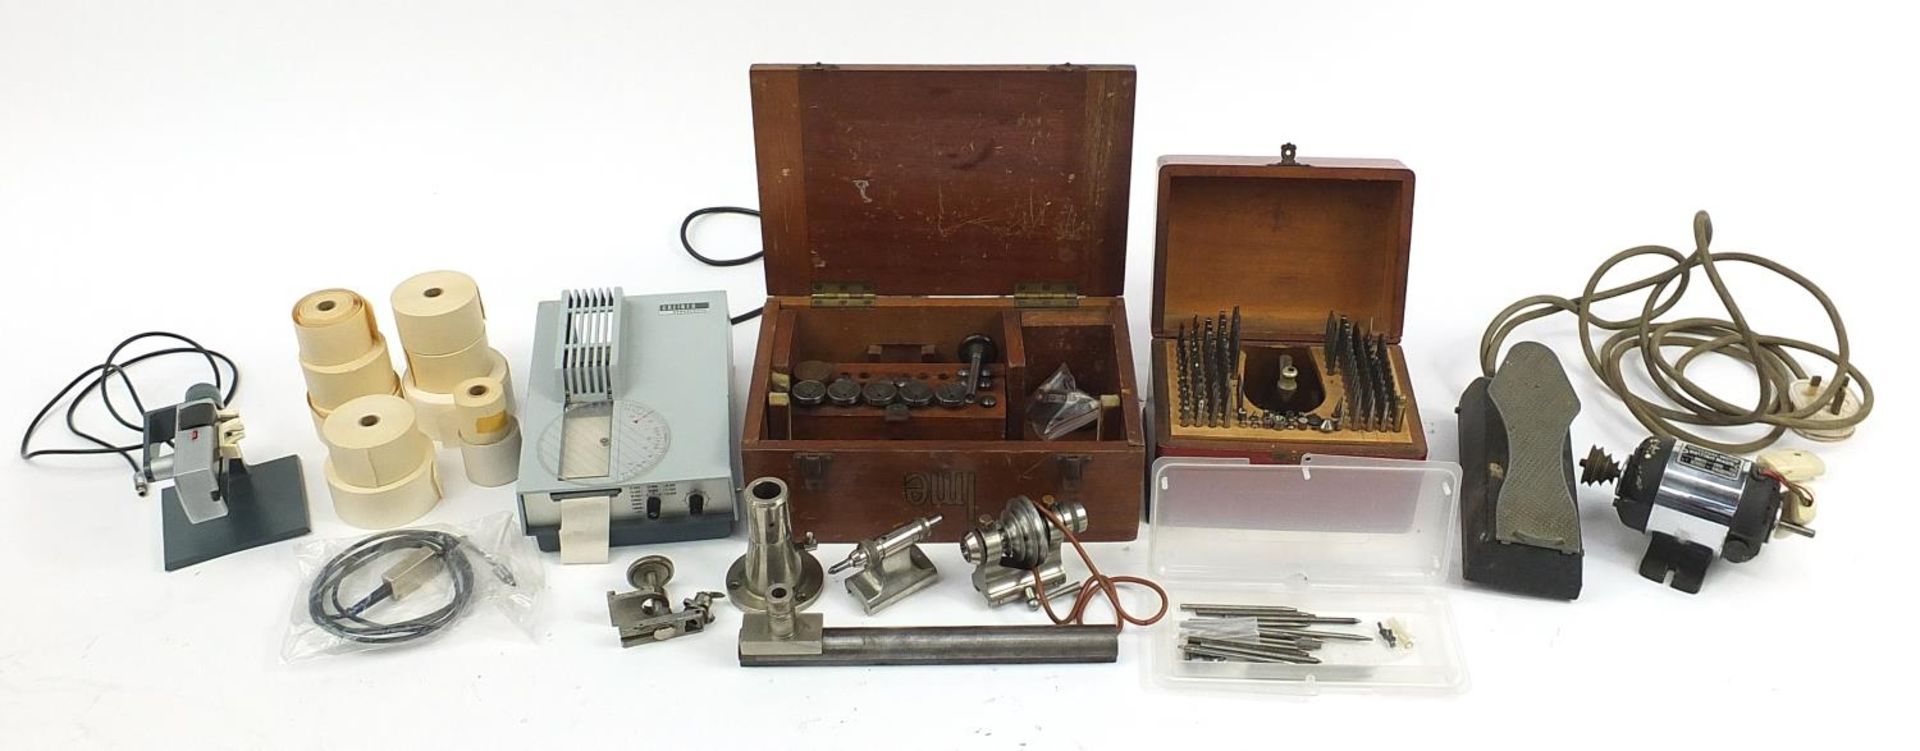 Vintage tools including an IME545 lathe and Greiner electronic timing machine